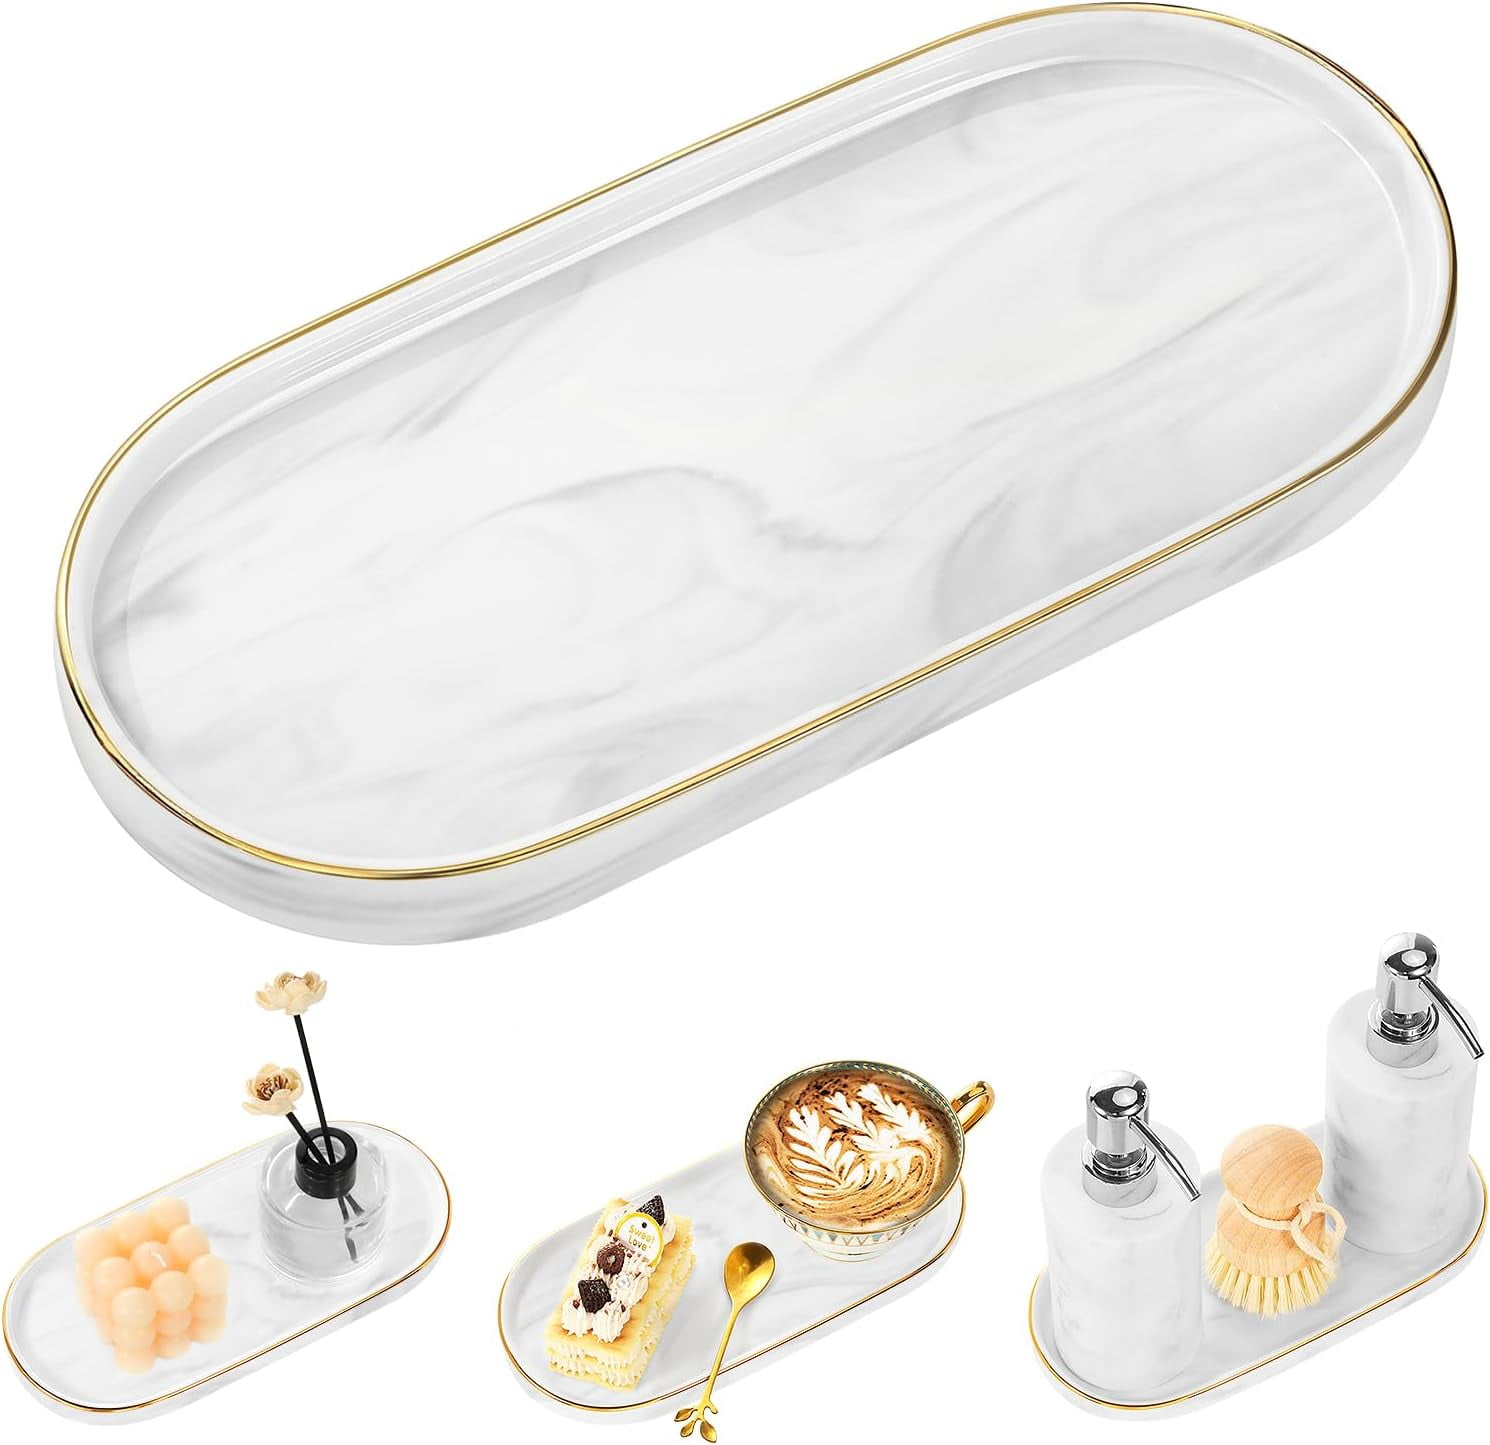 Spacewiser Countertop and Vanity Tray - Small 7.7 Silicone Soap Dispenser  Tray, Shatterproof Flexible Bathroom Tray, Kitchen Sink Tray for Soap  Bottles, Key Trinket Ring Tray, Original Silicone Tray 